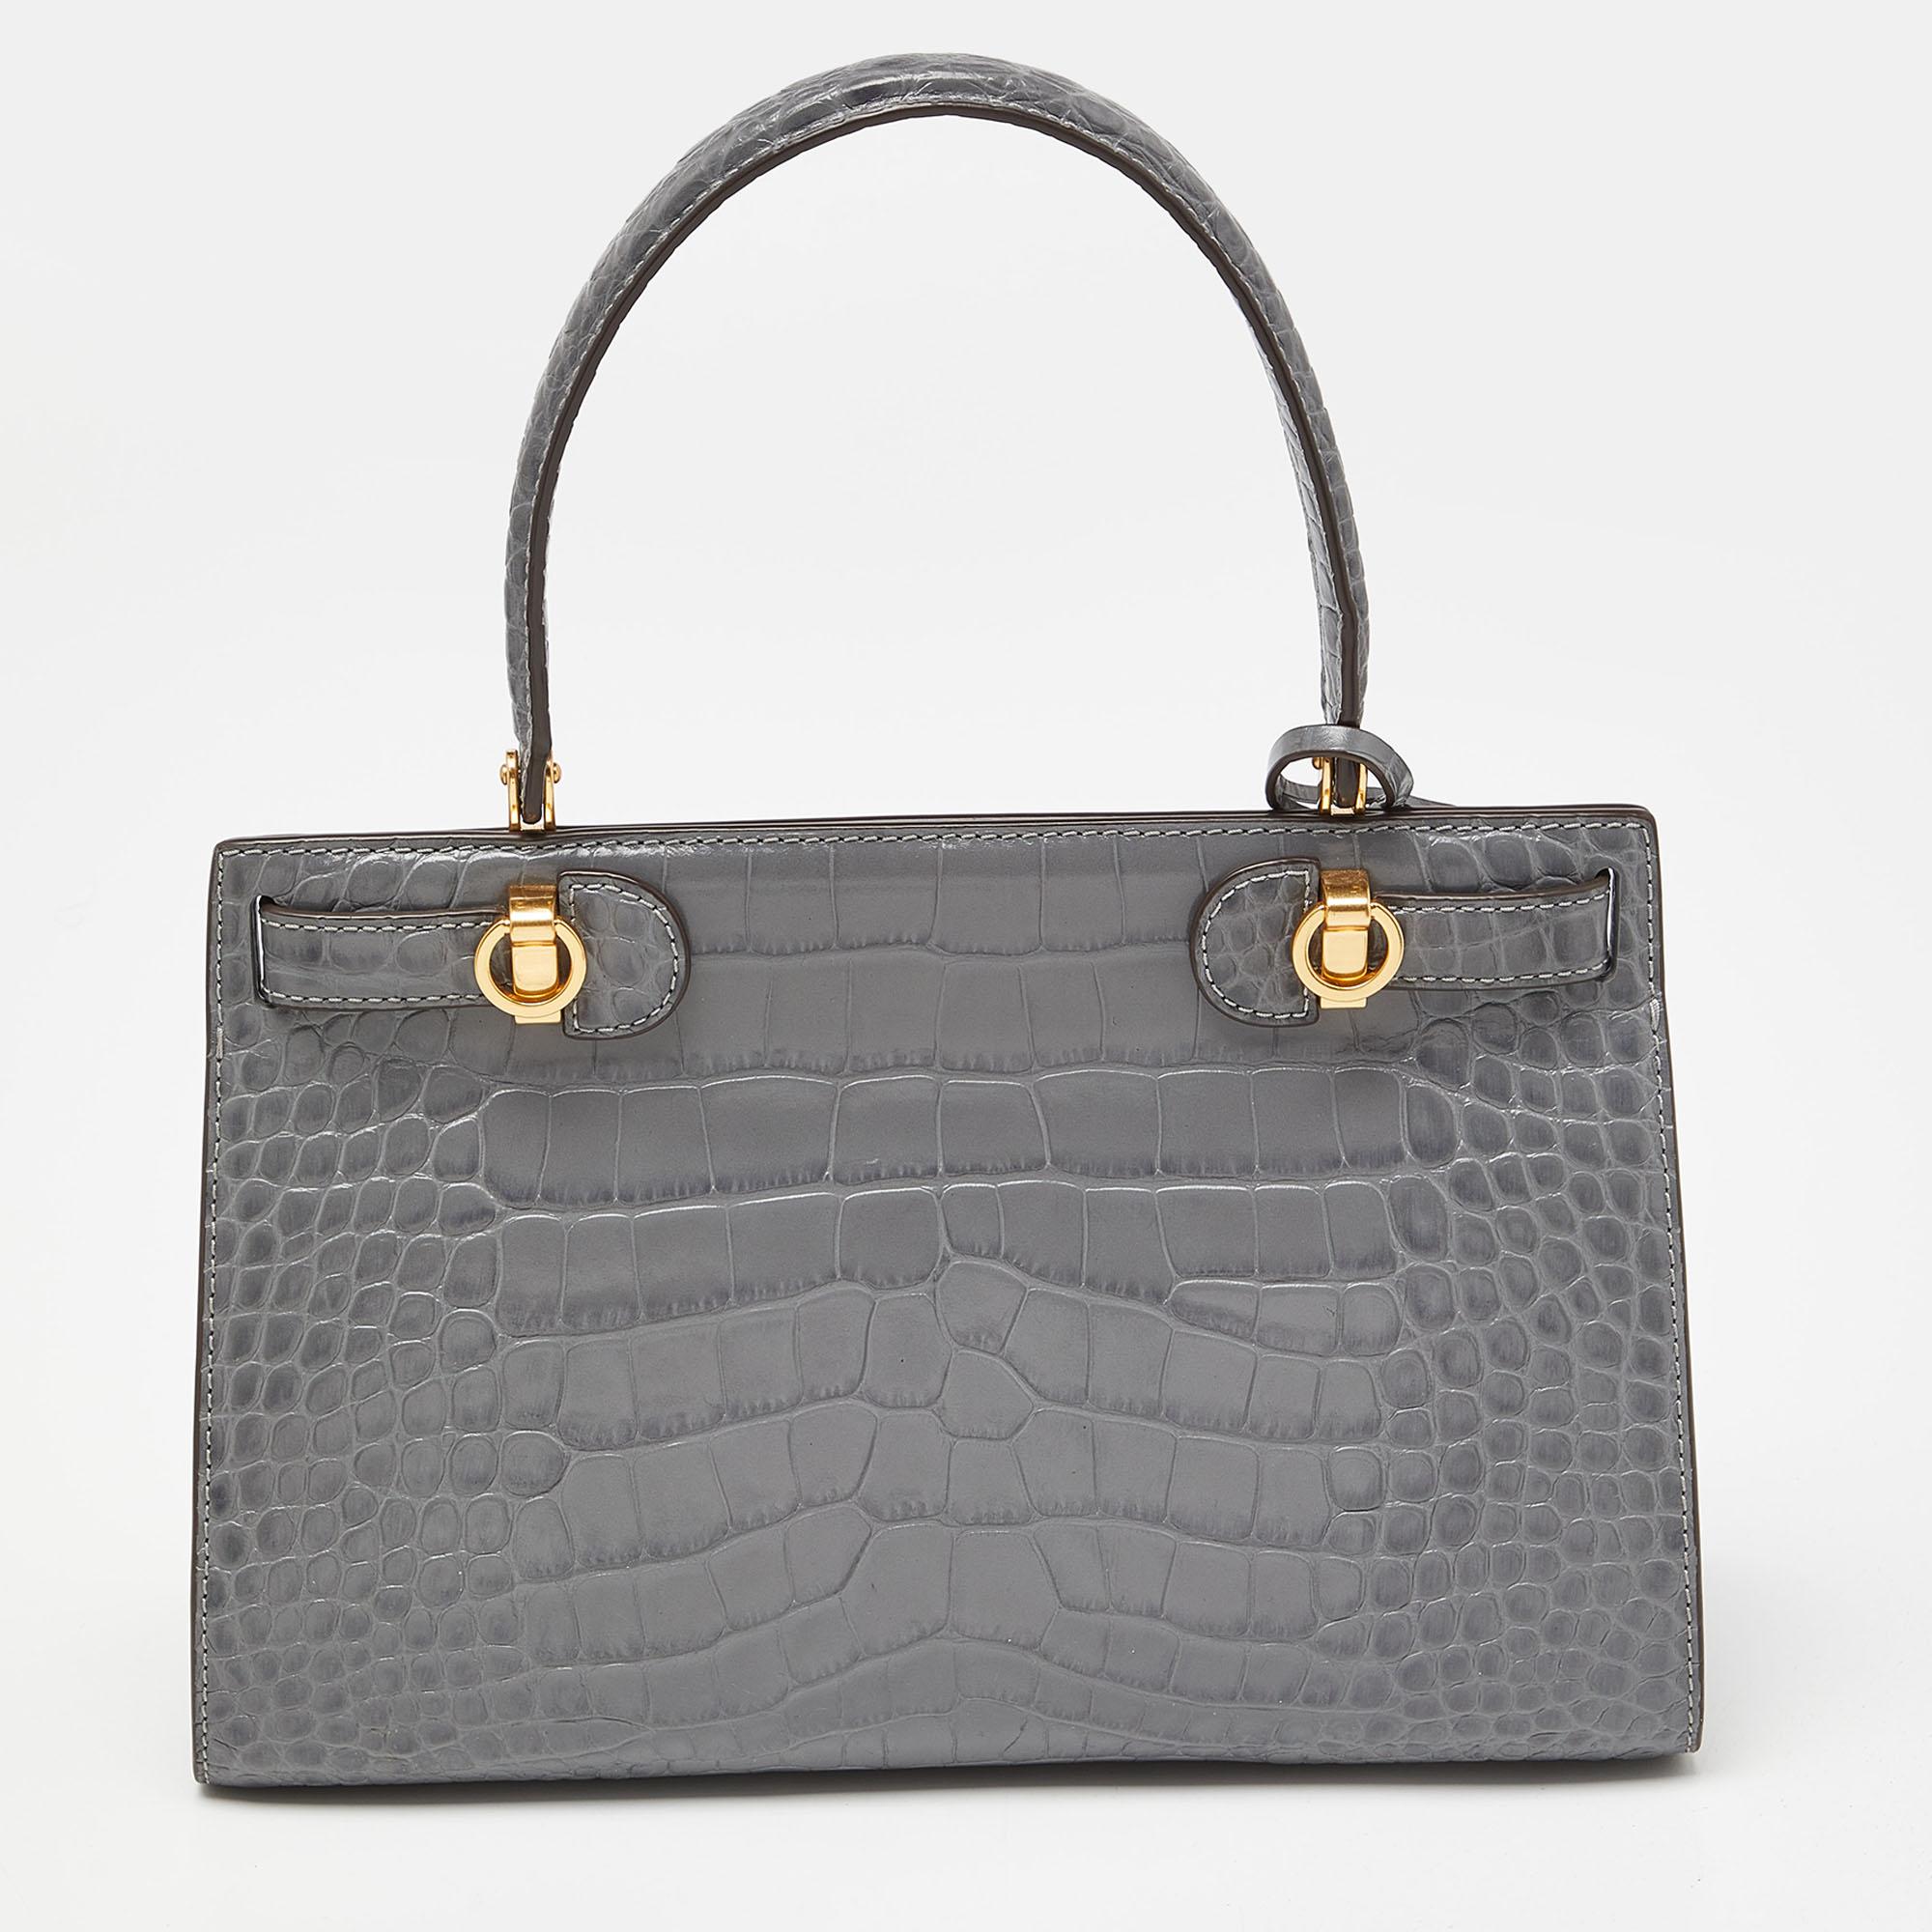 Designed with croc-embossed leather, this bag is an excellent adornment to carry every day. The leather interior is well-sized, and the top handle is easy to hold. Designed to last, this handbag from Tory Burch will elevate your outfit.

Includes: